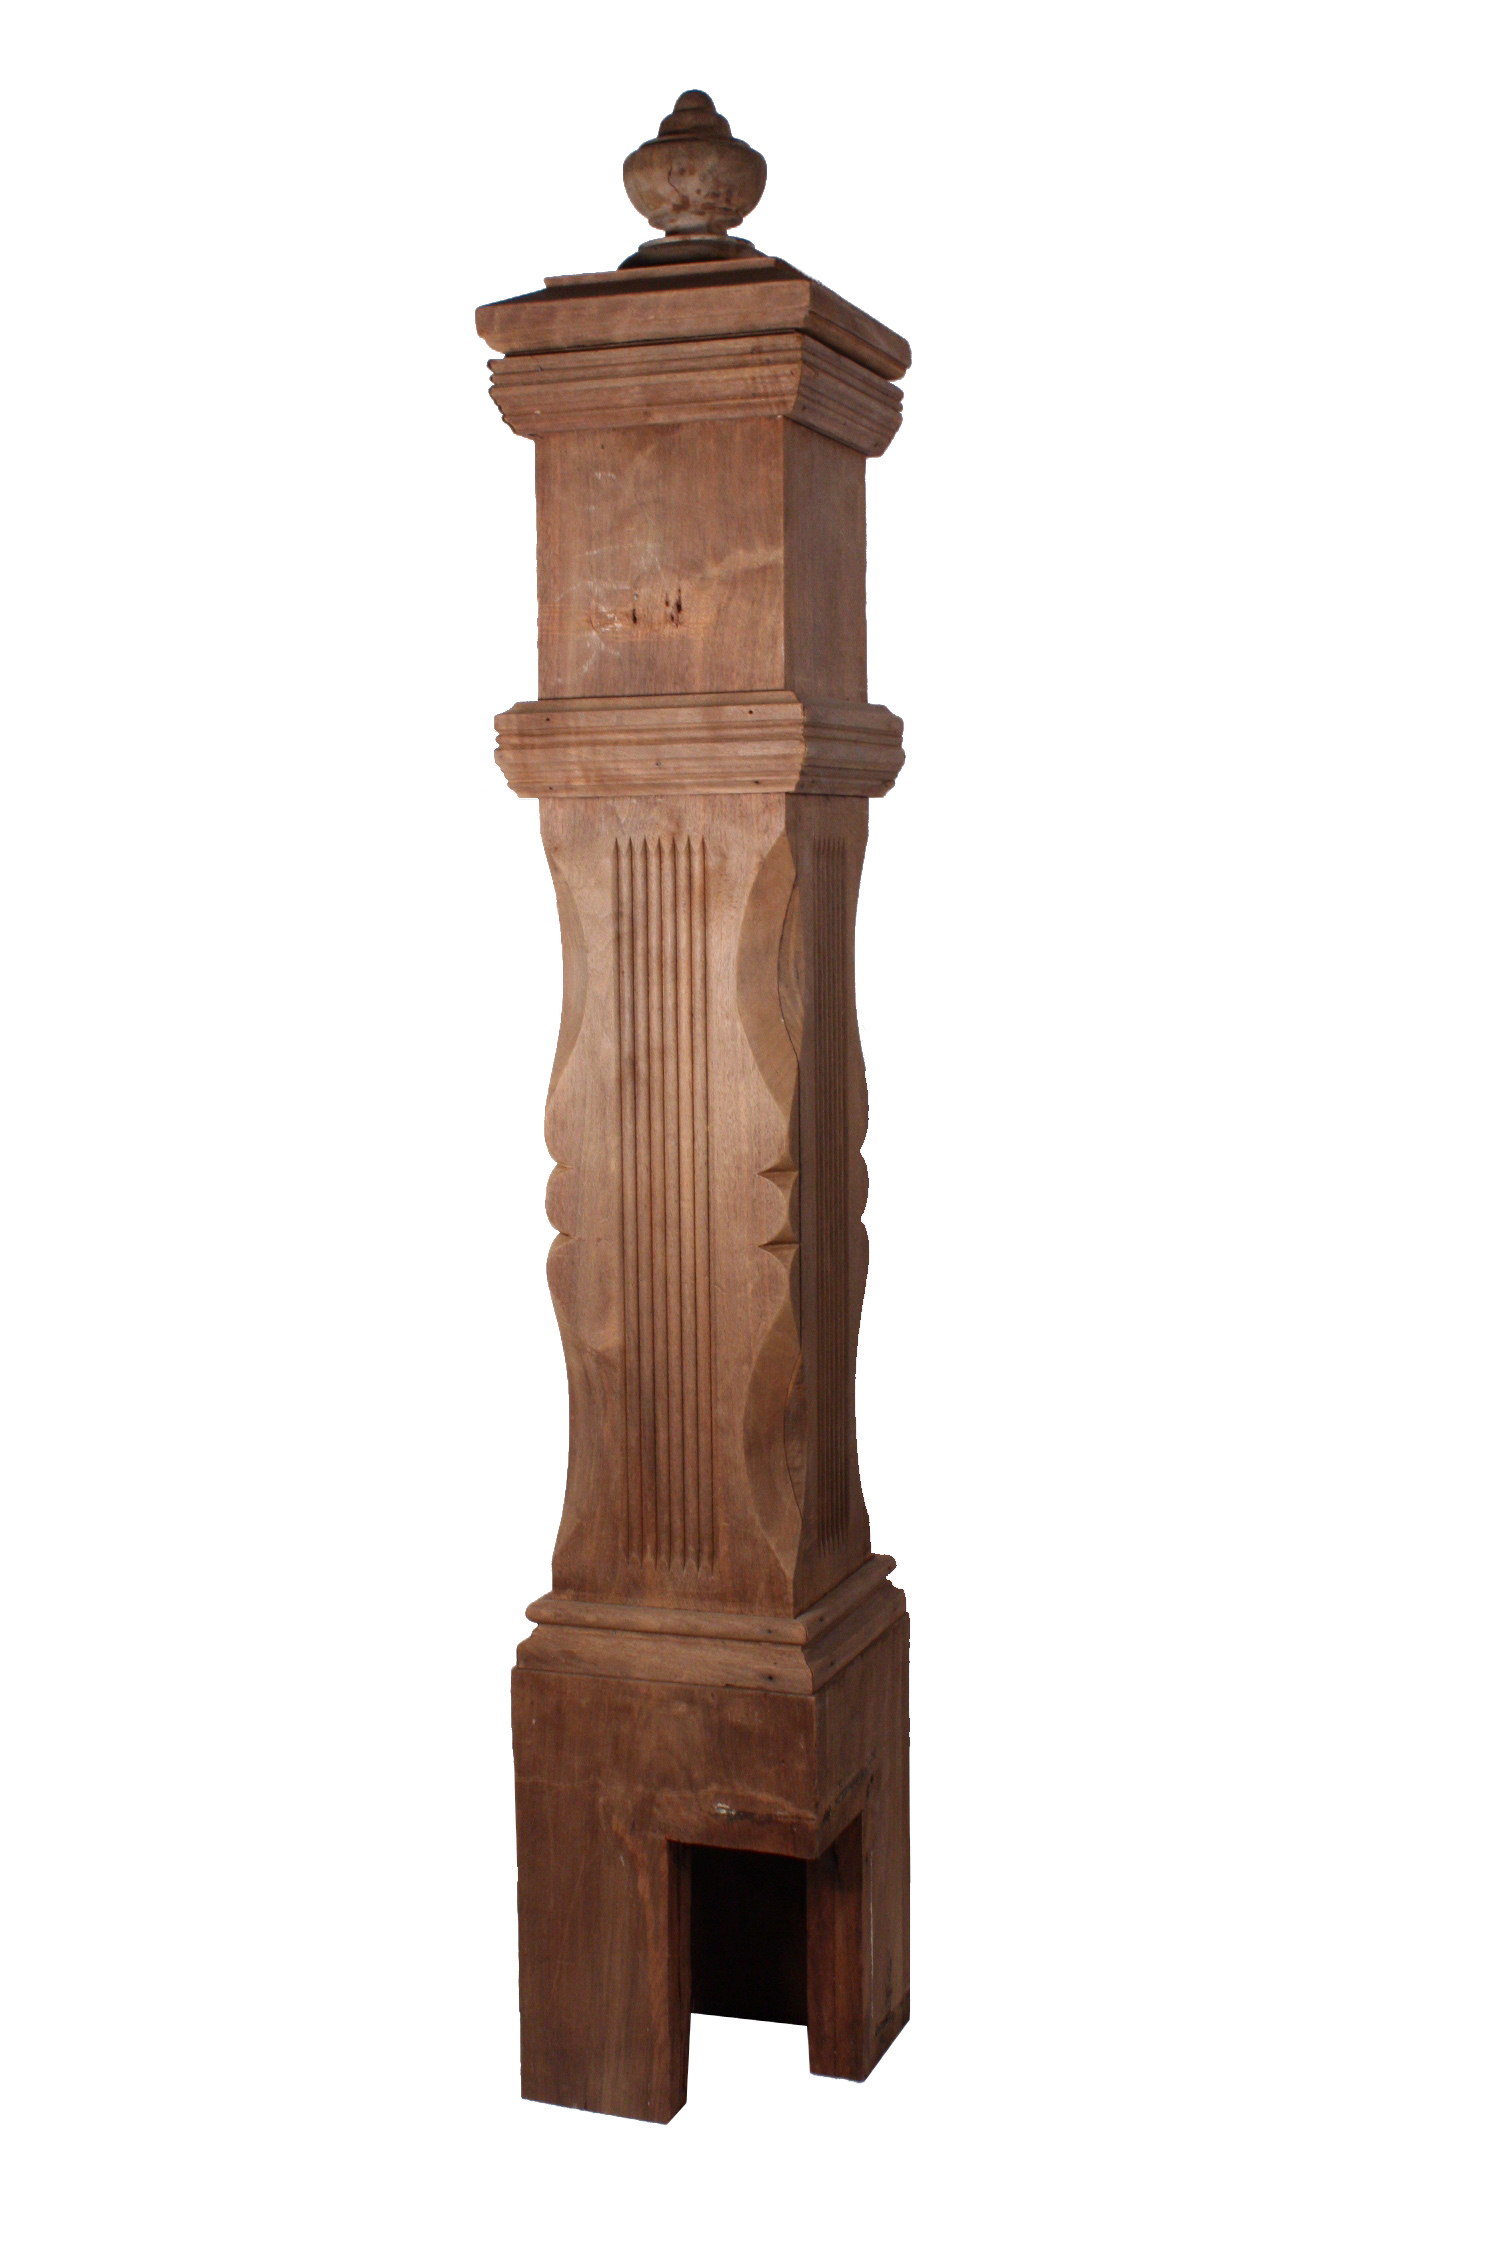 SOLD Superb Antique Walnut Boxed Newel Post, 19th Century-19117